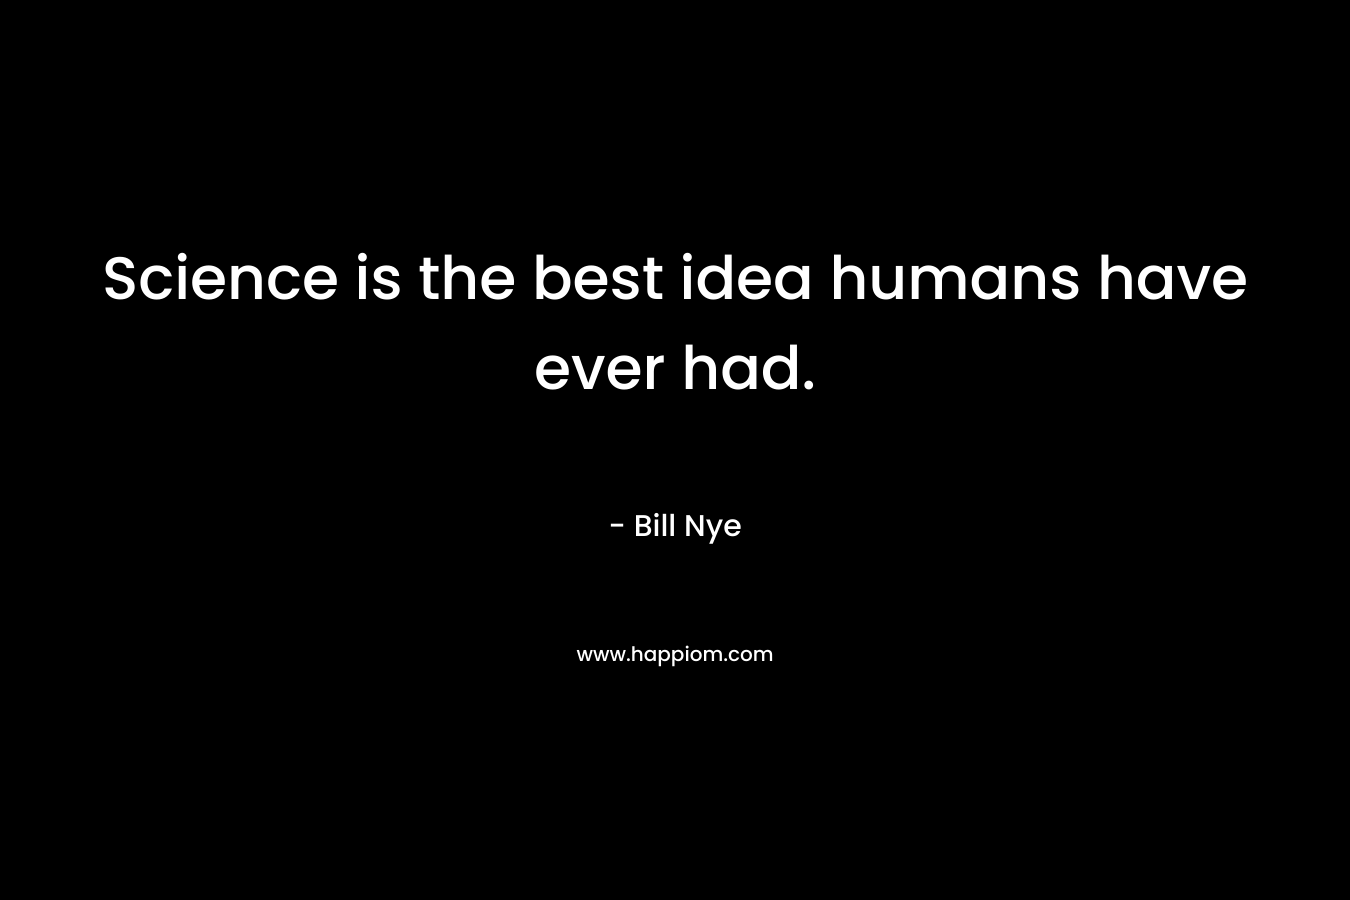 Science is the best idea humans have ever had. – Bill Nye